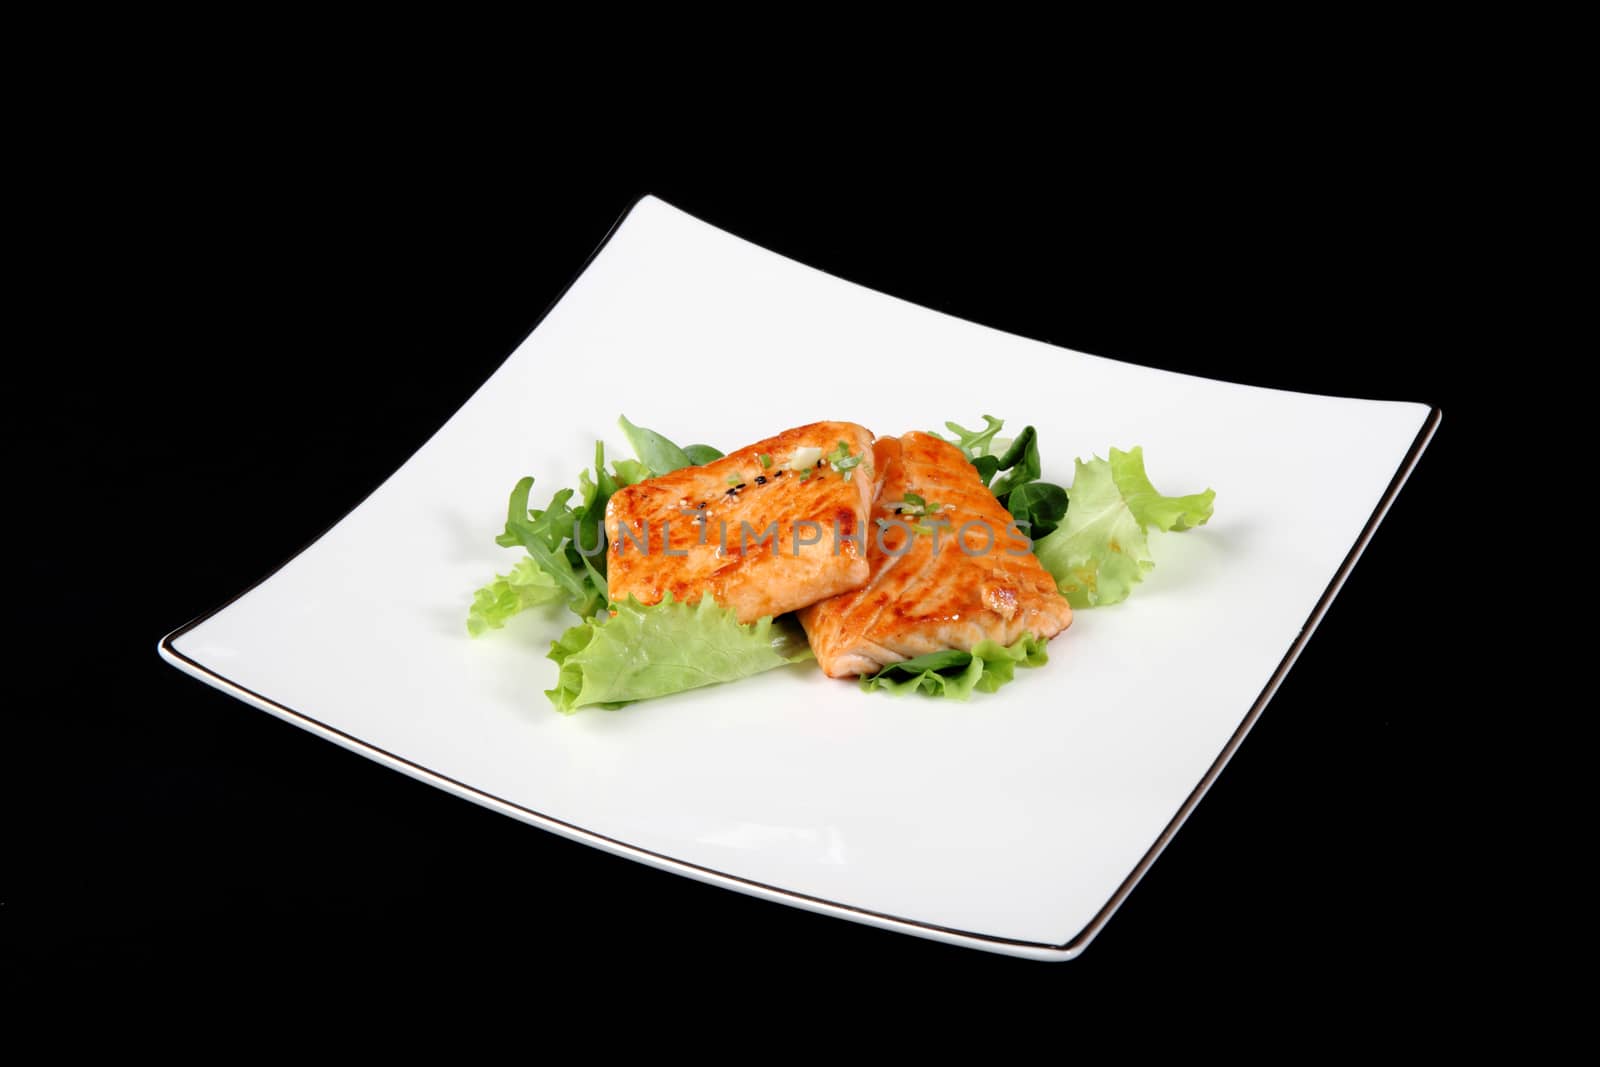 grilled salmon with vegetables on square plate, black background